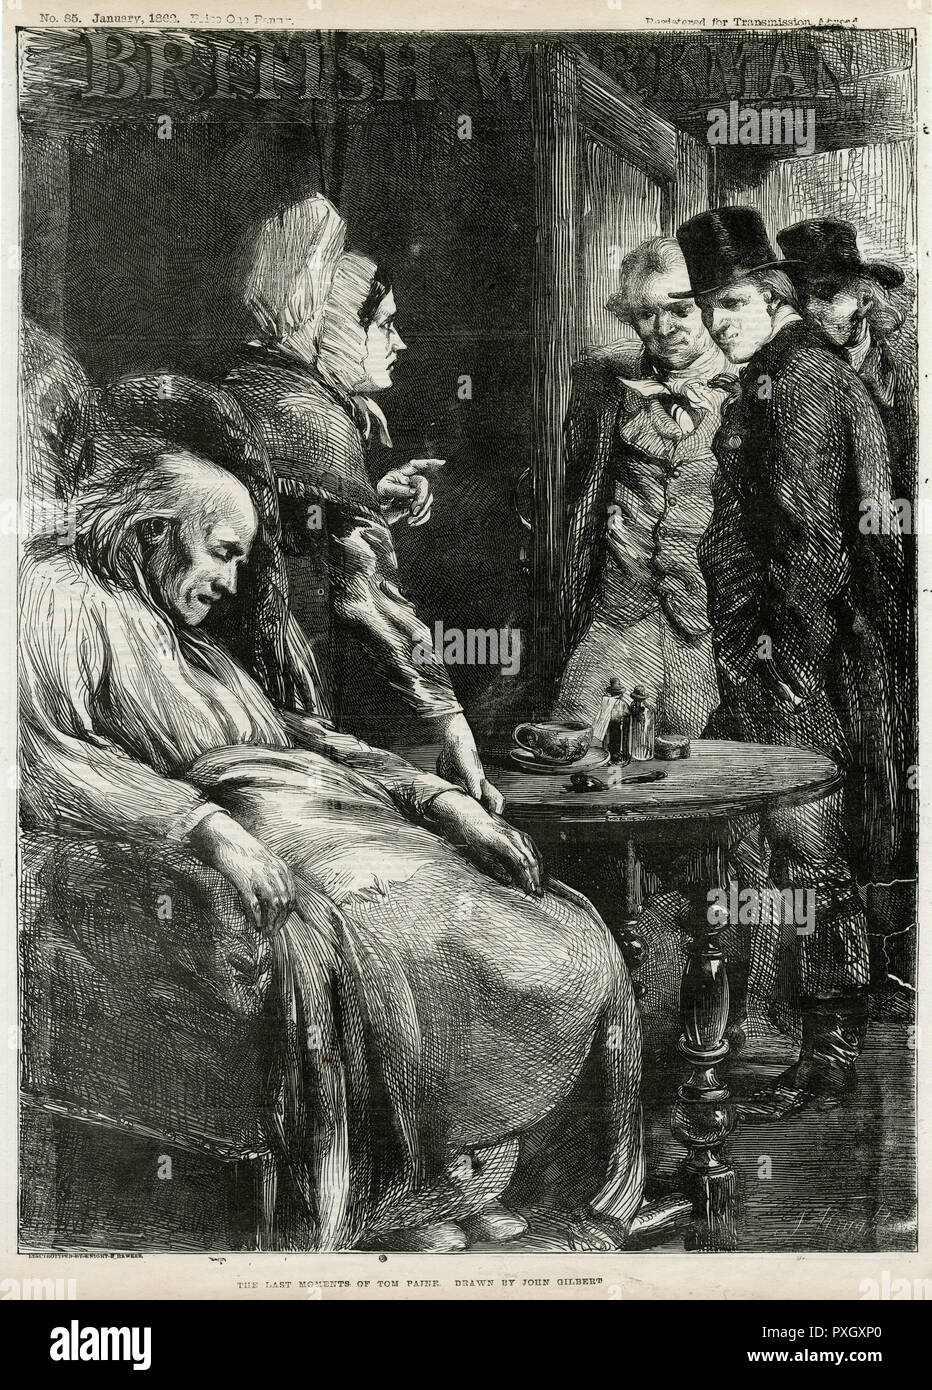 Front cover of The British Workman, showing Thomas Paine (1737-1809), English-born American political activist, philosopher, political theorist and revolutionary, as visitors come to see him as he is dying at his home in New York City, USA. Few people attended his funeral, as he had been ostracised for his anti-religious views.        Date: 1809 Stock Photo